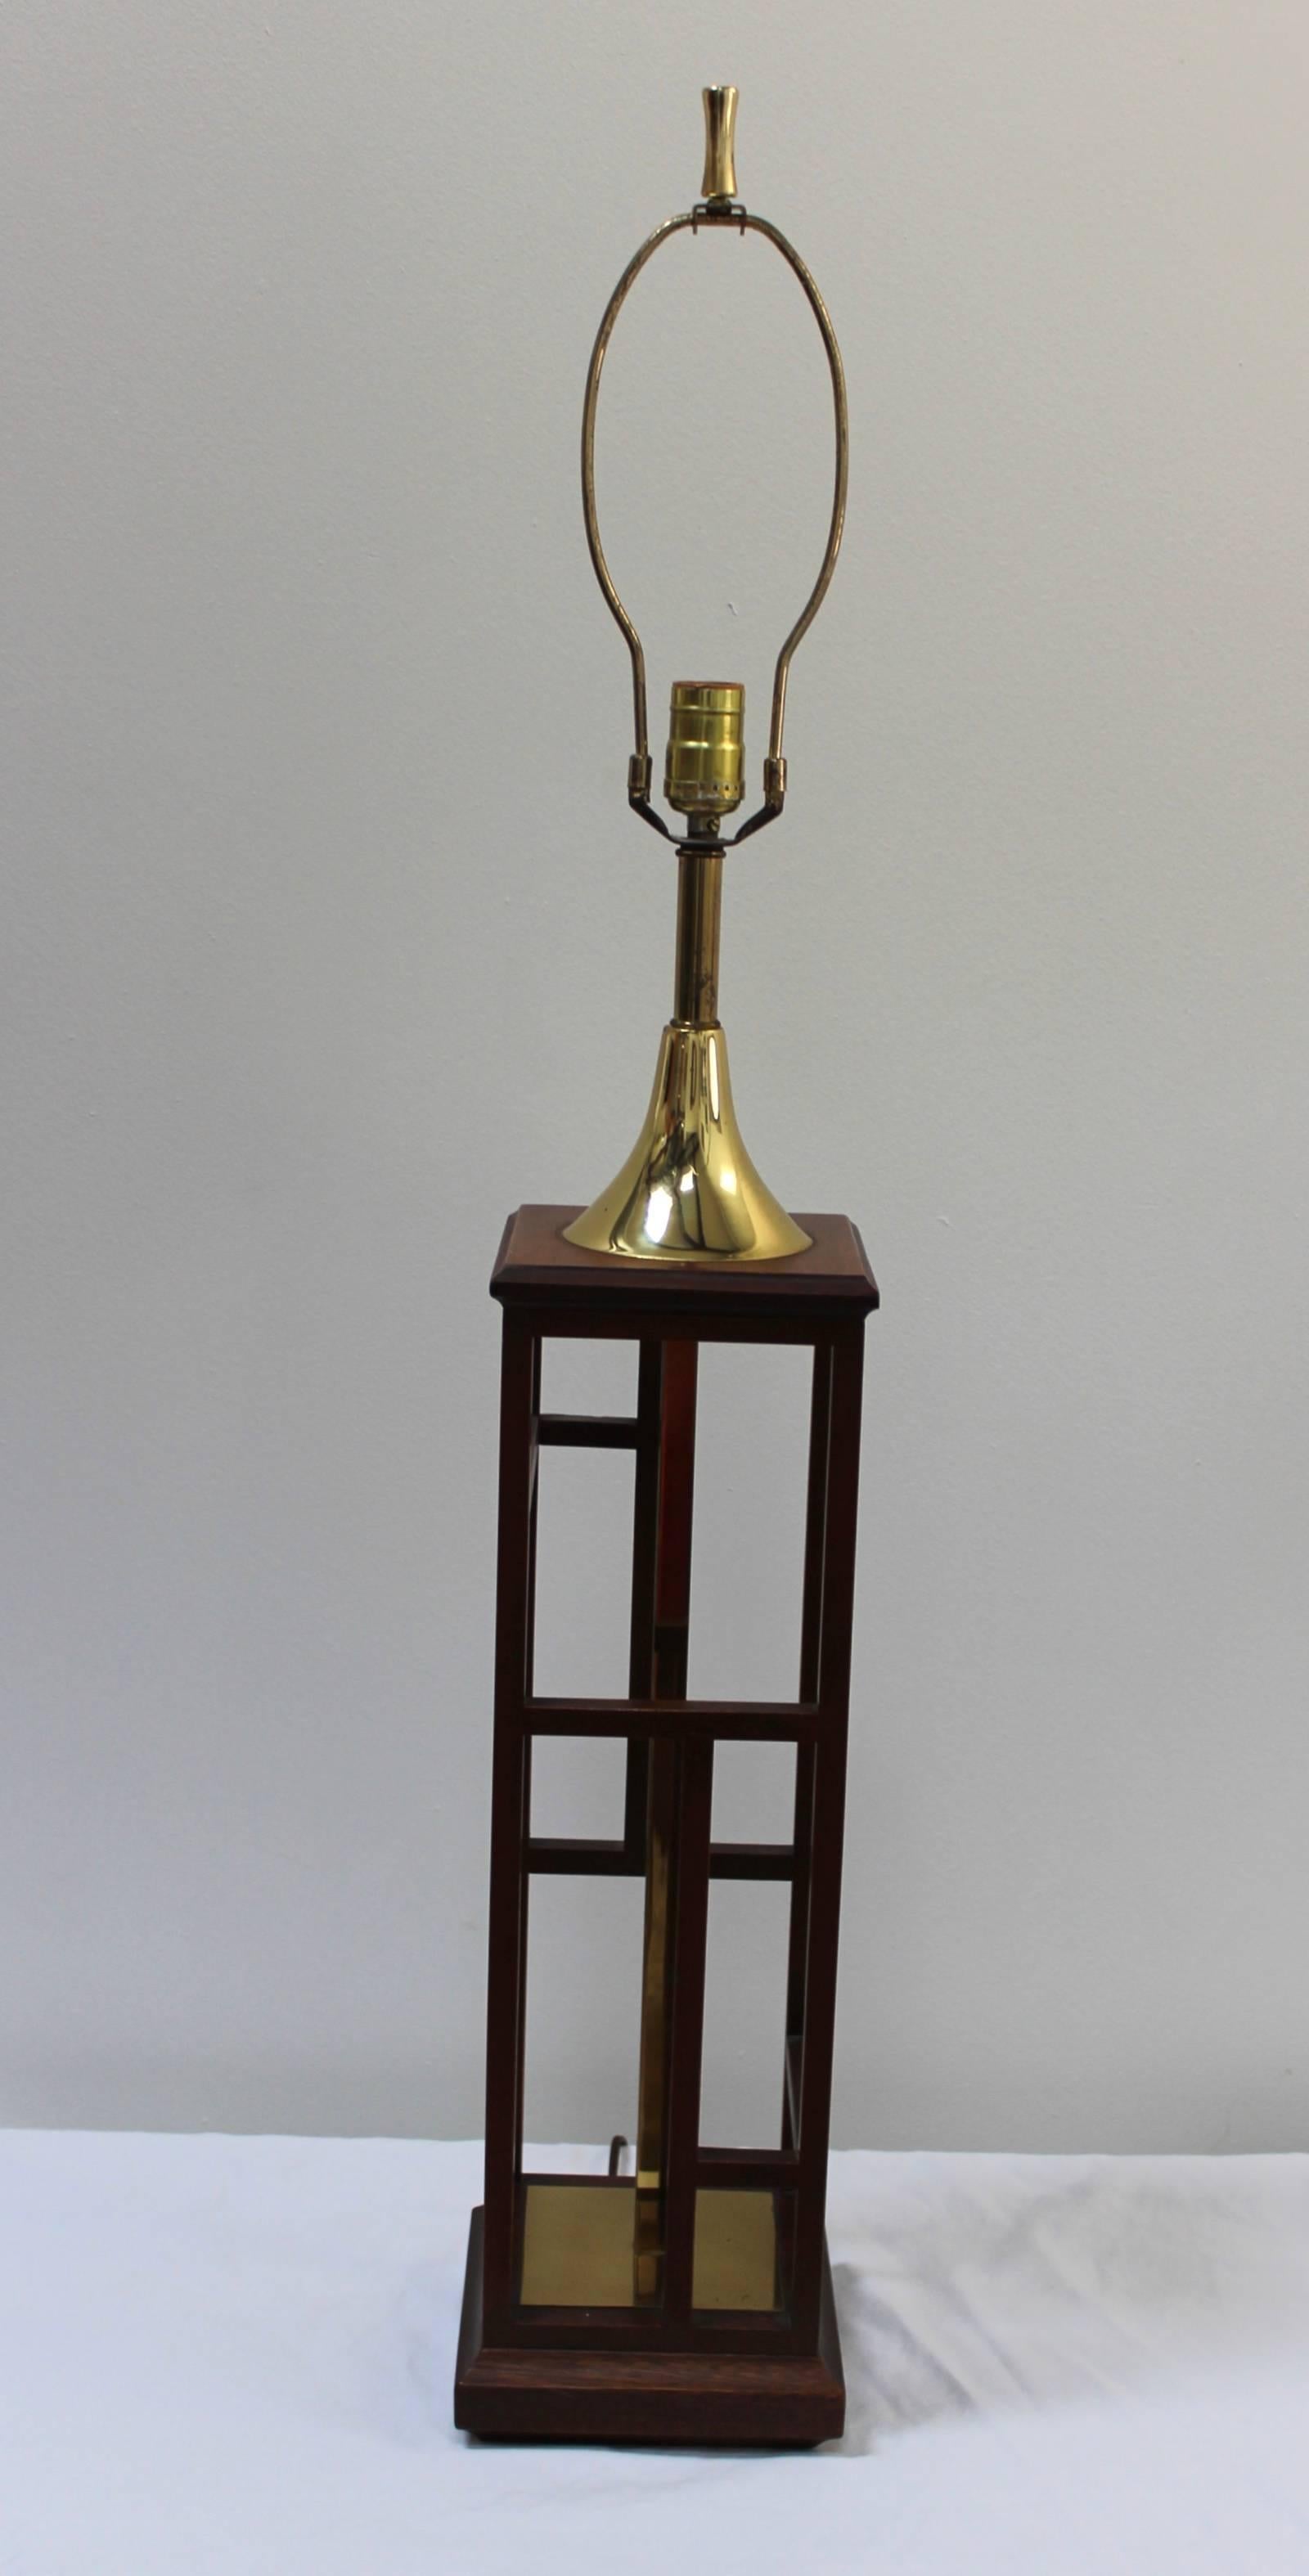 1960s modern brass and walnut architectural table lamp.

Shade for photography only.

Height to light socket 31''.